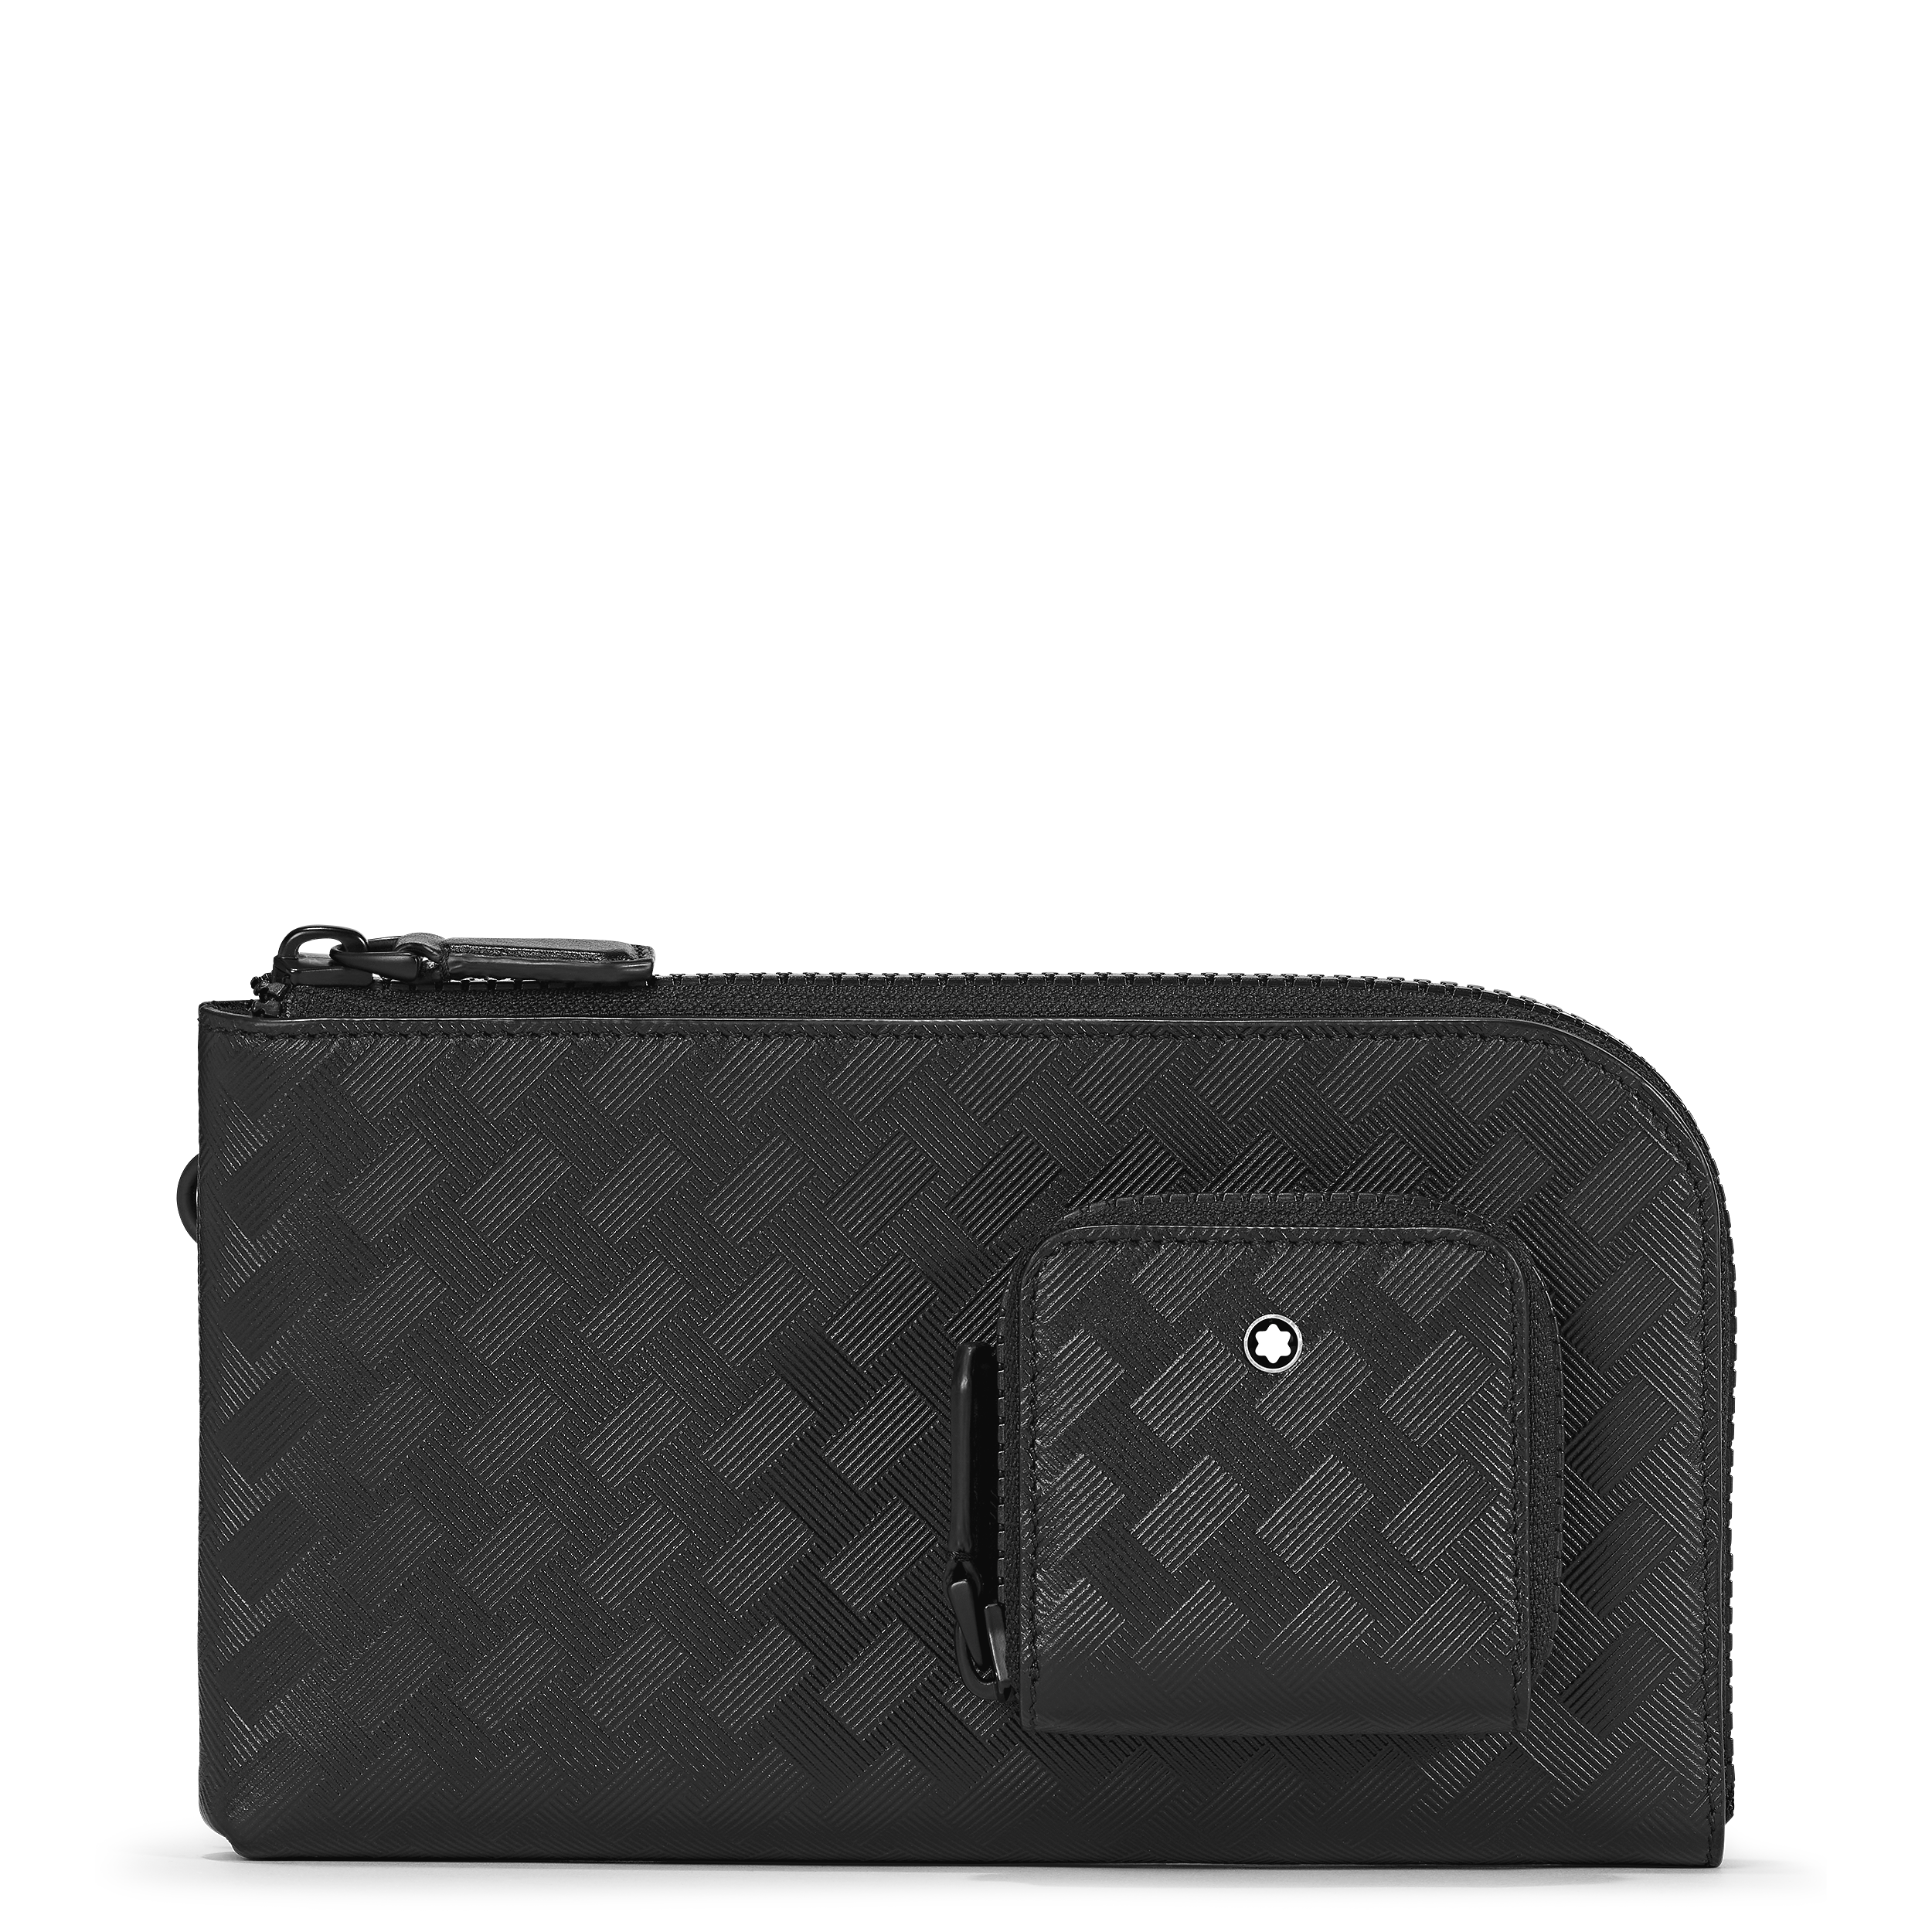 Montblanc Extreme 3.0 wallet 6cc with pocket, image 1